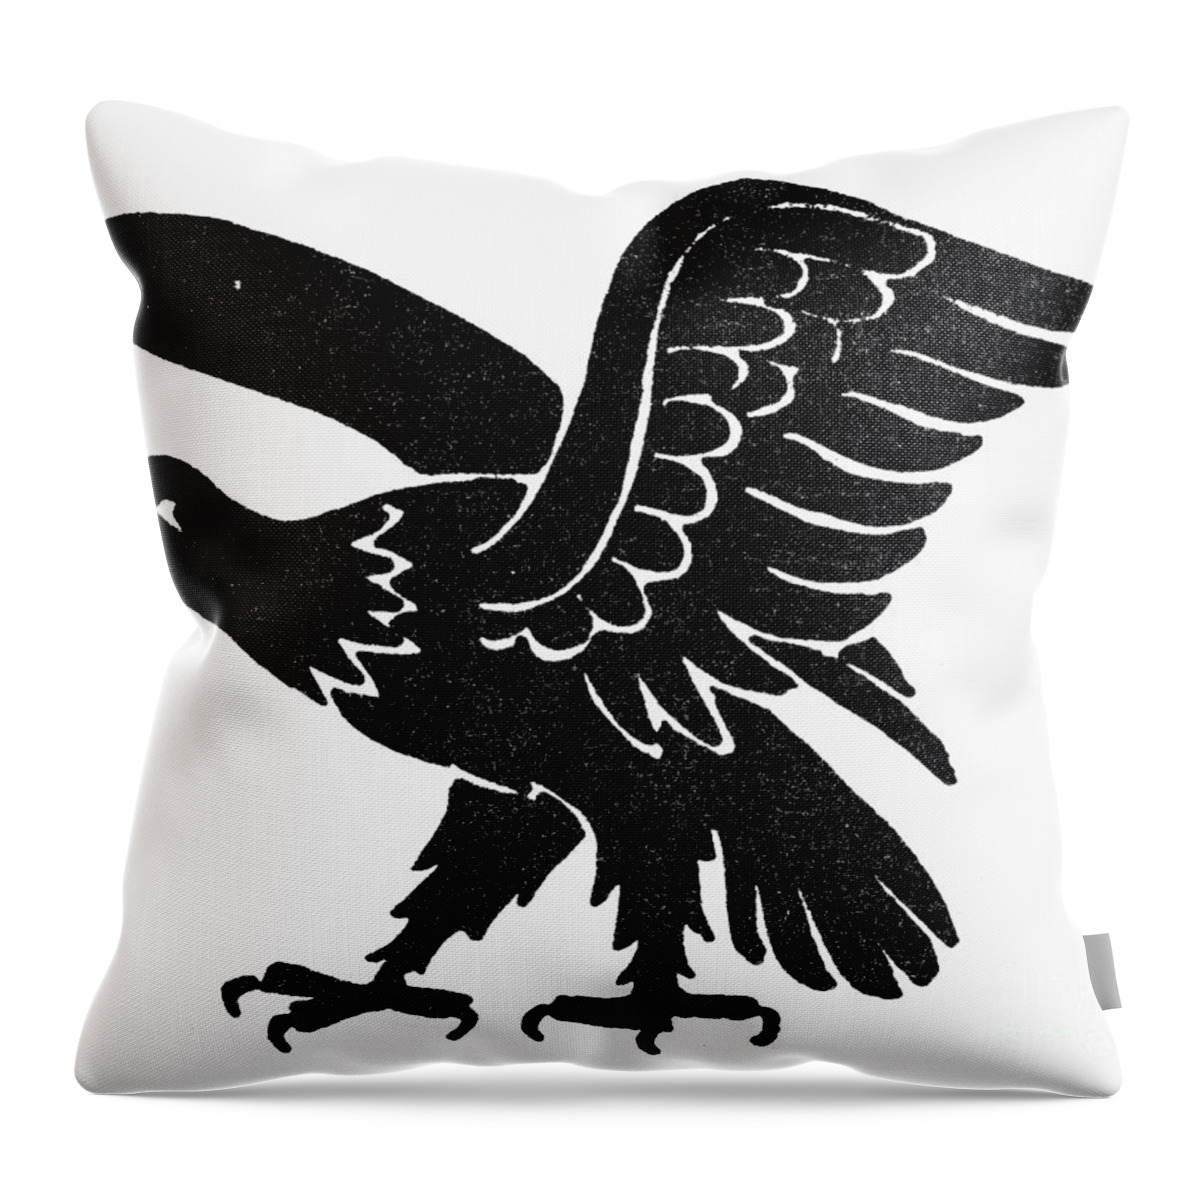 America Throw Pillow featuring the photograph Symbol: Eagle by Granger